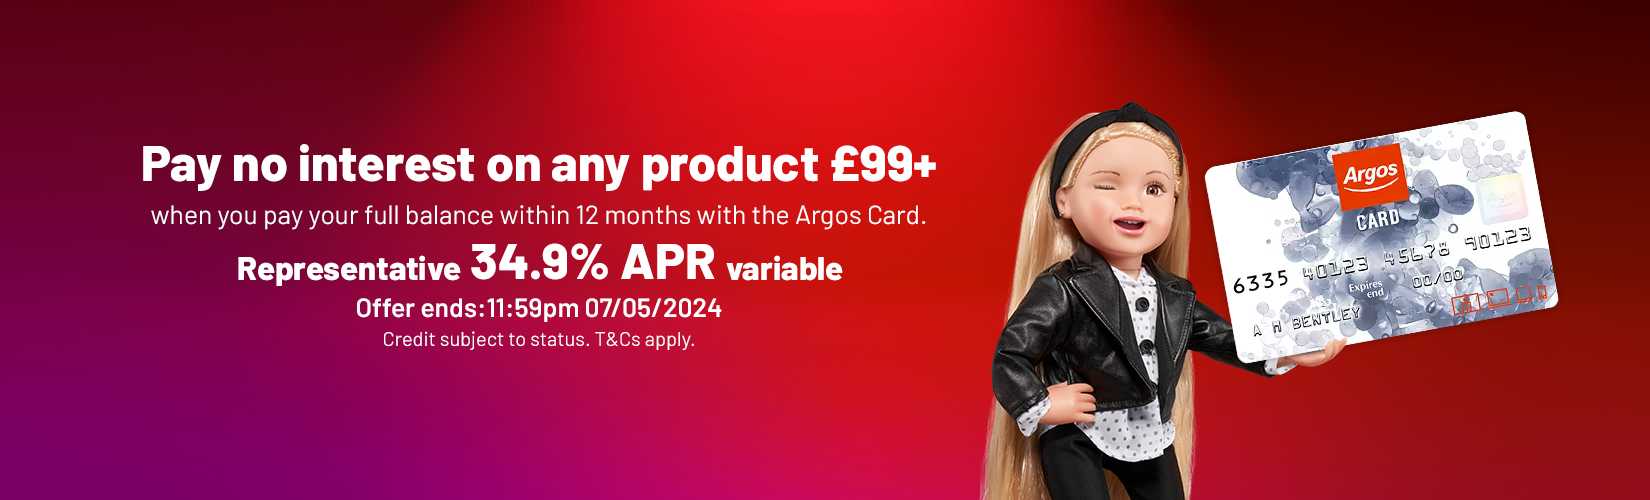 Pay no interest on any product £99+. when you pay your full balance with 12 months with the Argos Card.